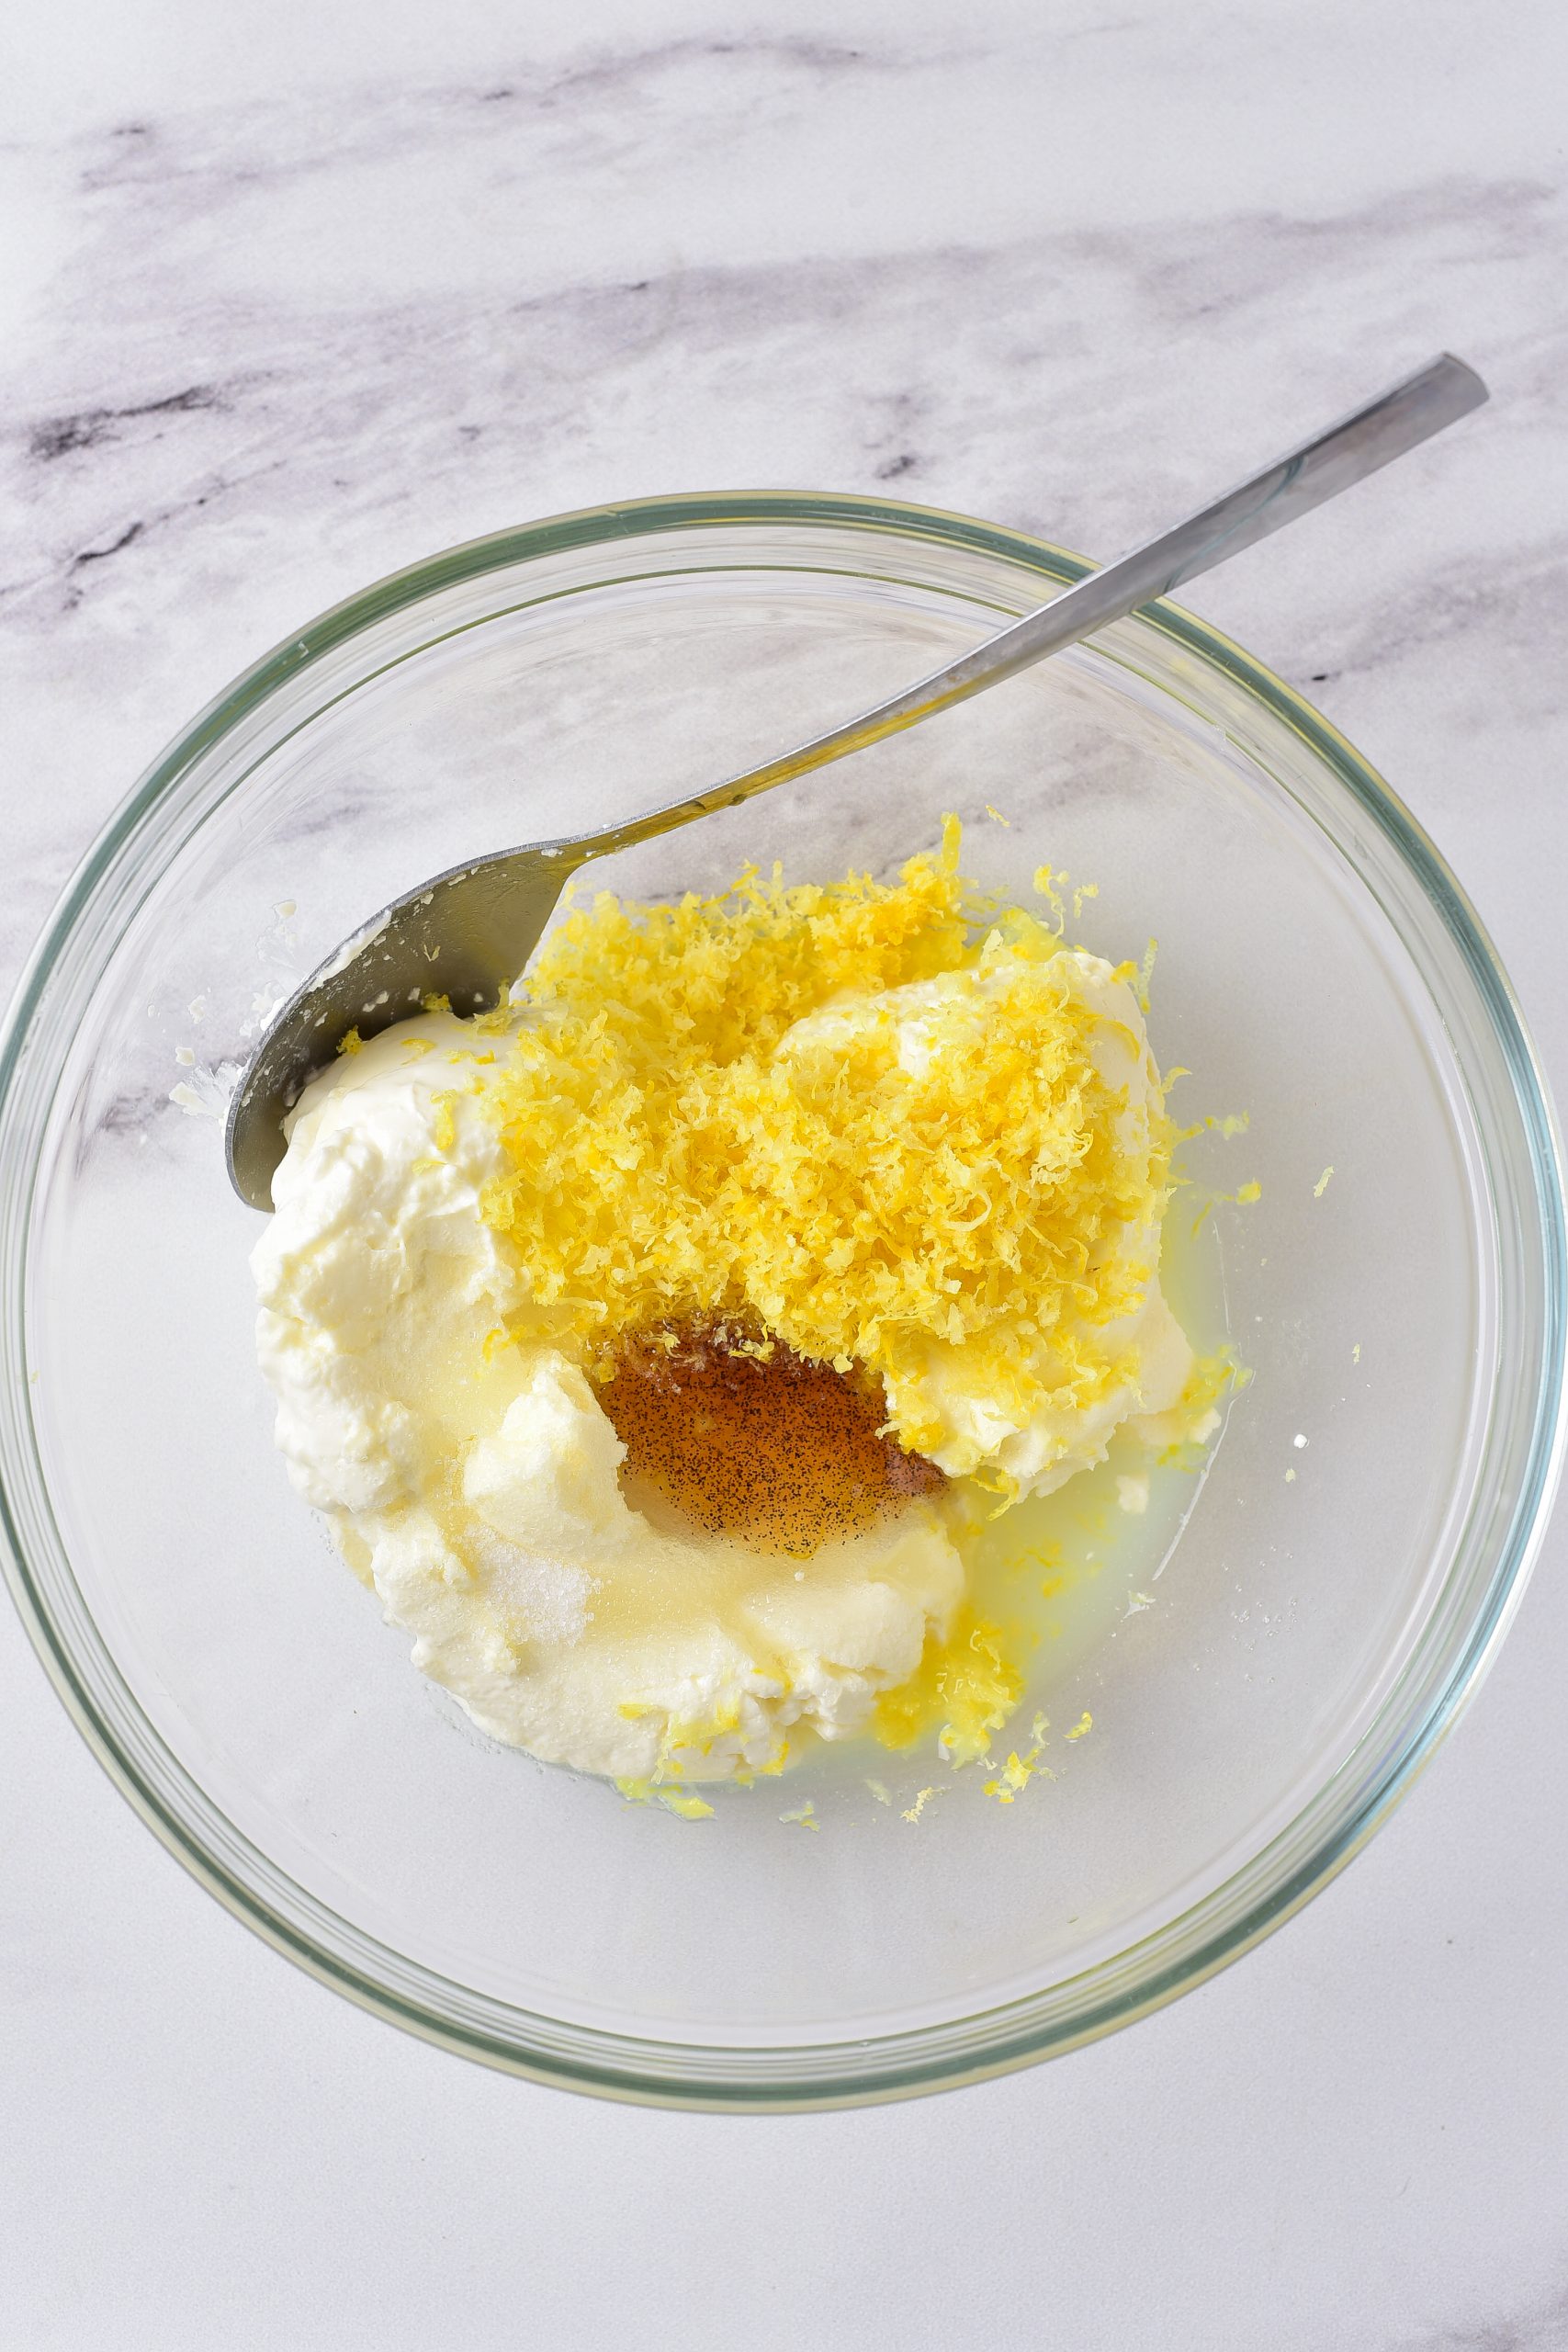 add the cream cheese, vanilla, lemon juice, lemon zest, and ½ cup of sugar to a mixing bowl